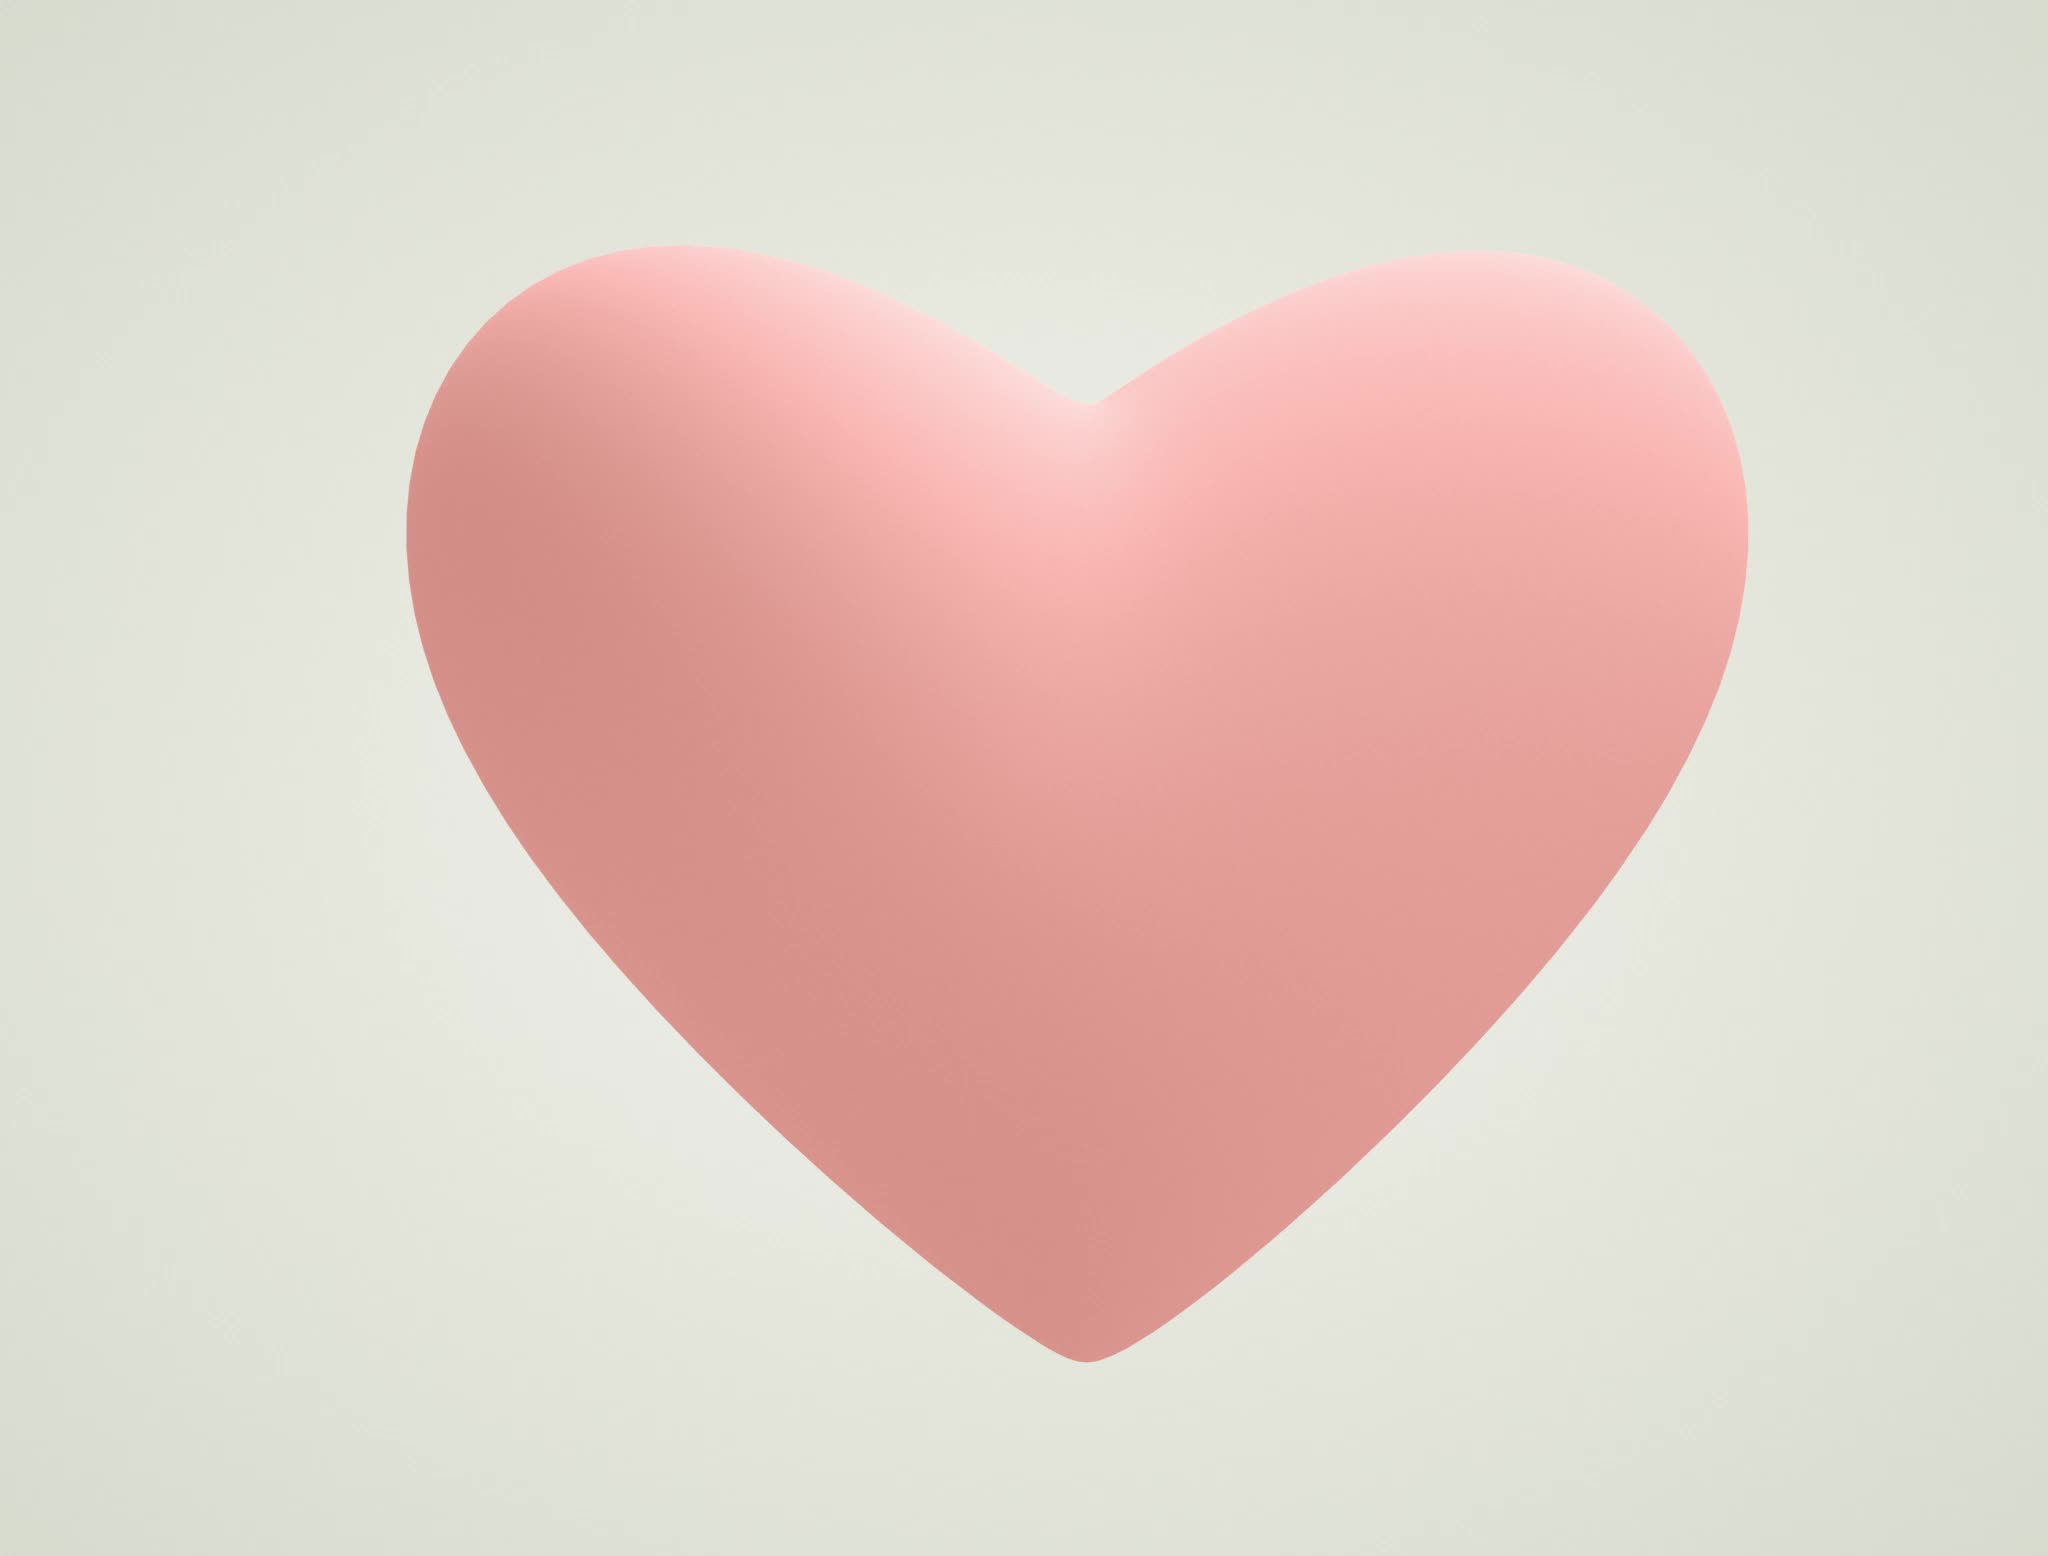 Heart 3d Animation Stock Video Footage for Free Download